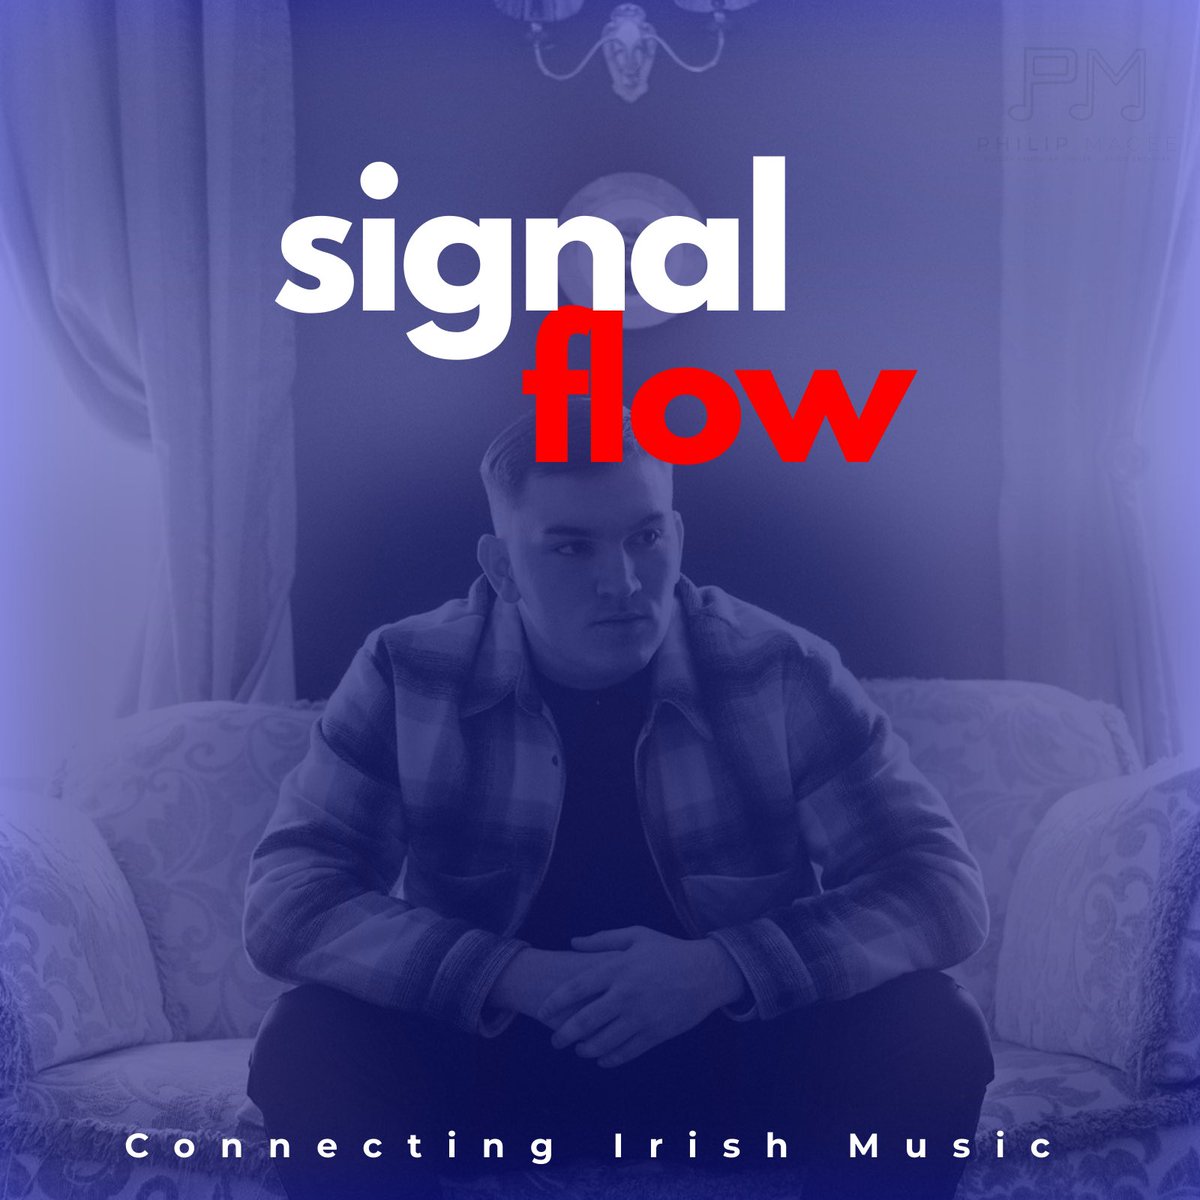 Playlist Update‼️ Signal Flow is packed with the best new Irish music, discover your favourites! Curated by myself and @philipmagee Follow on Spotify sptfy.com/9eqP Cover artist - @Brdmrshllmusic (latest single // Make Believe) #NewMusicFriday